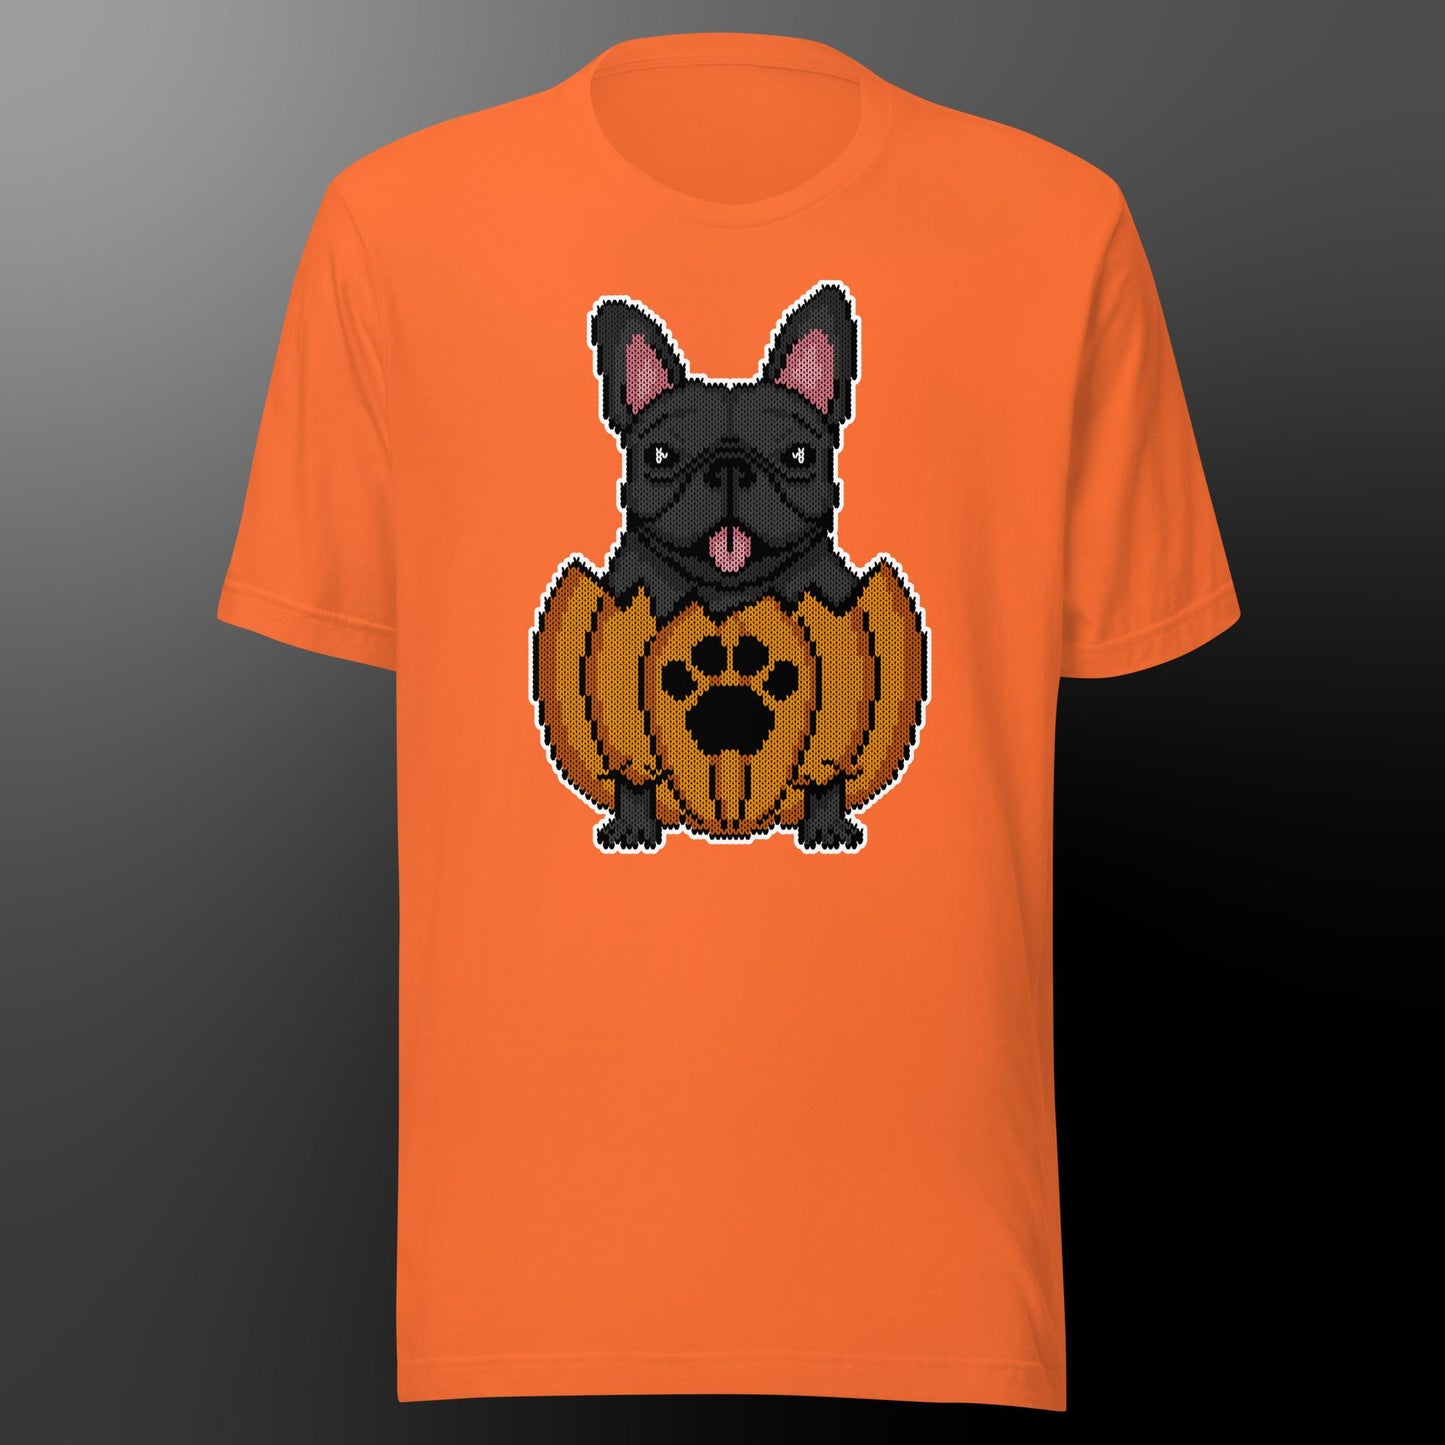 Halloween shirt with frenchie (fur color black)